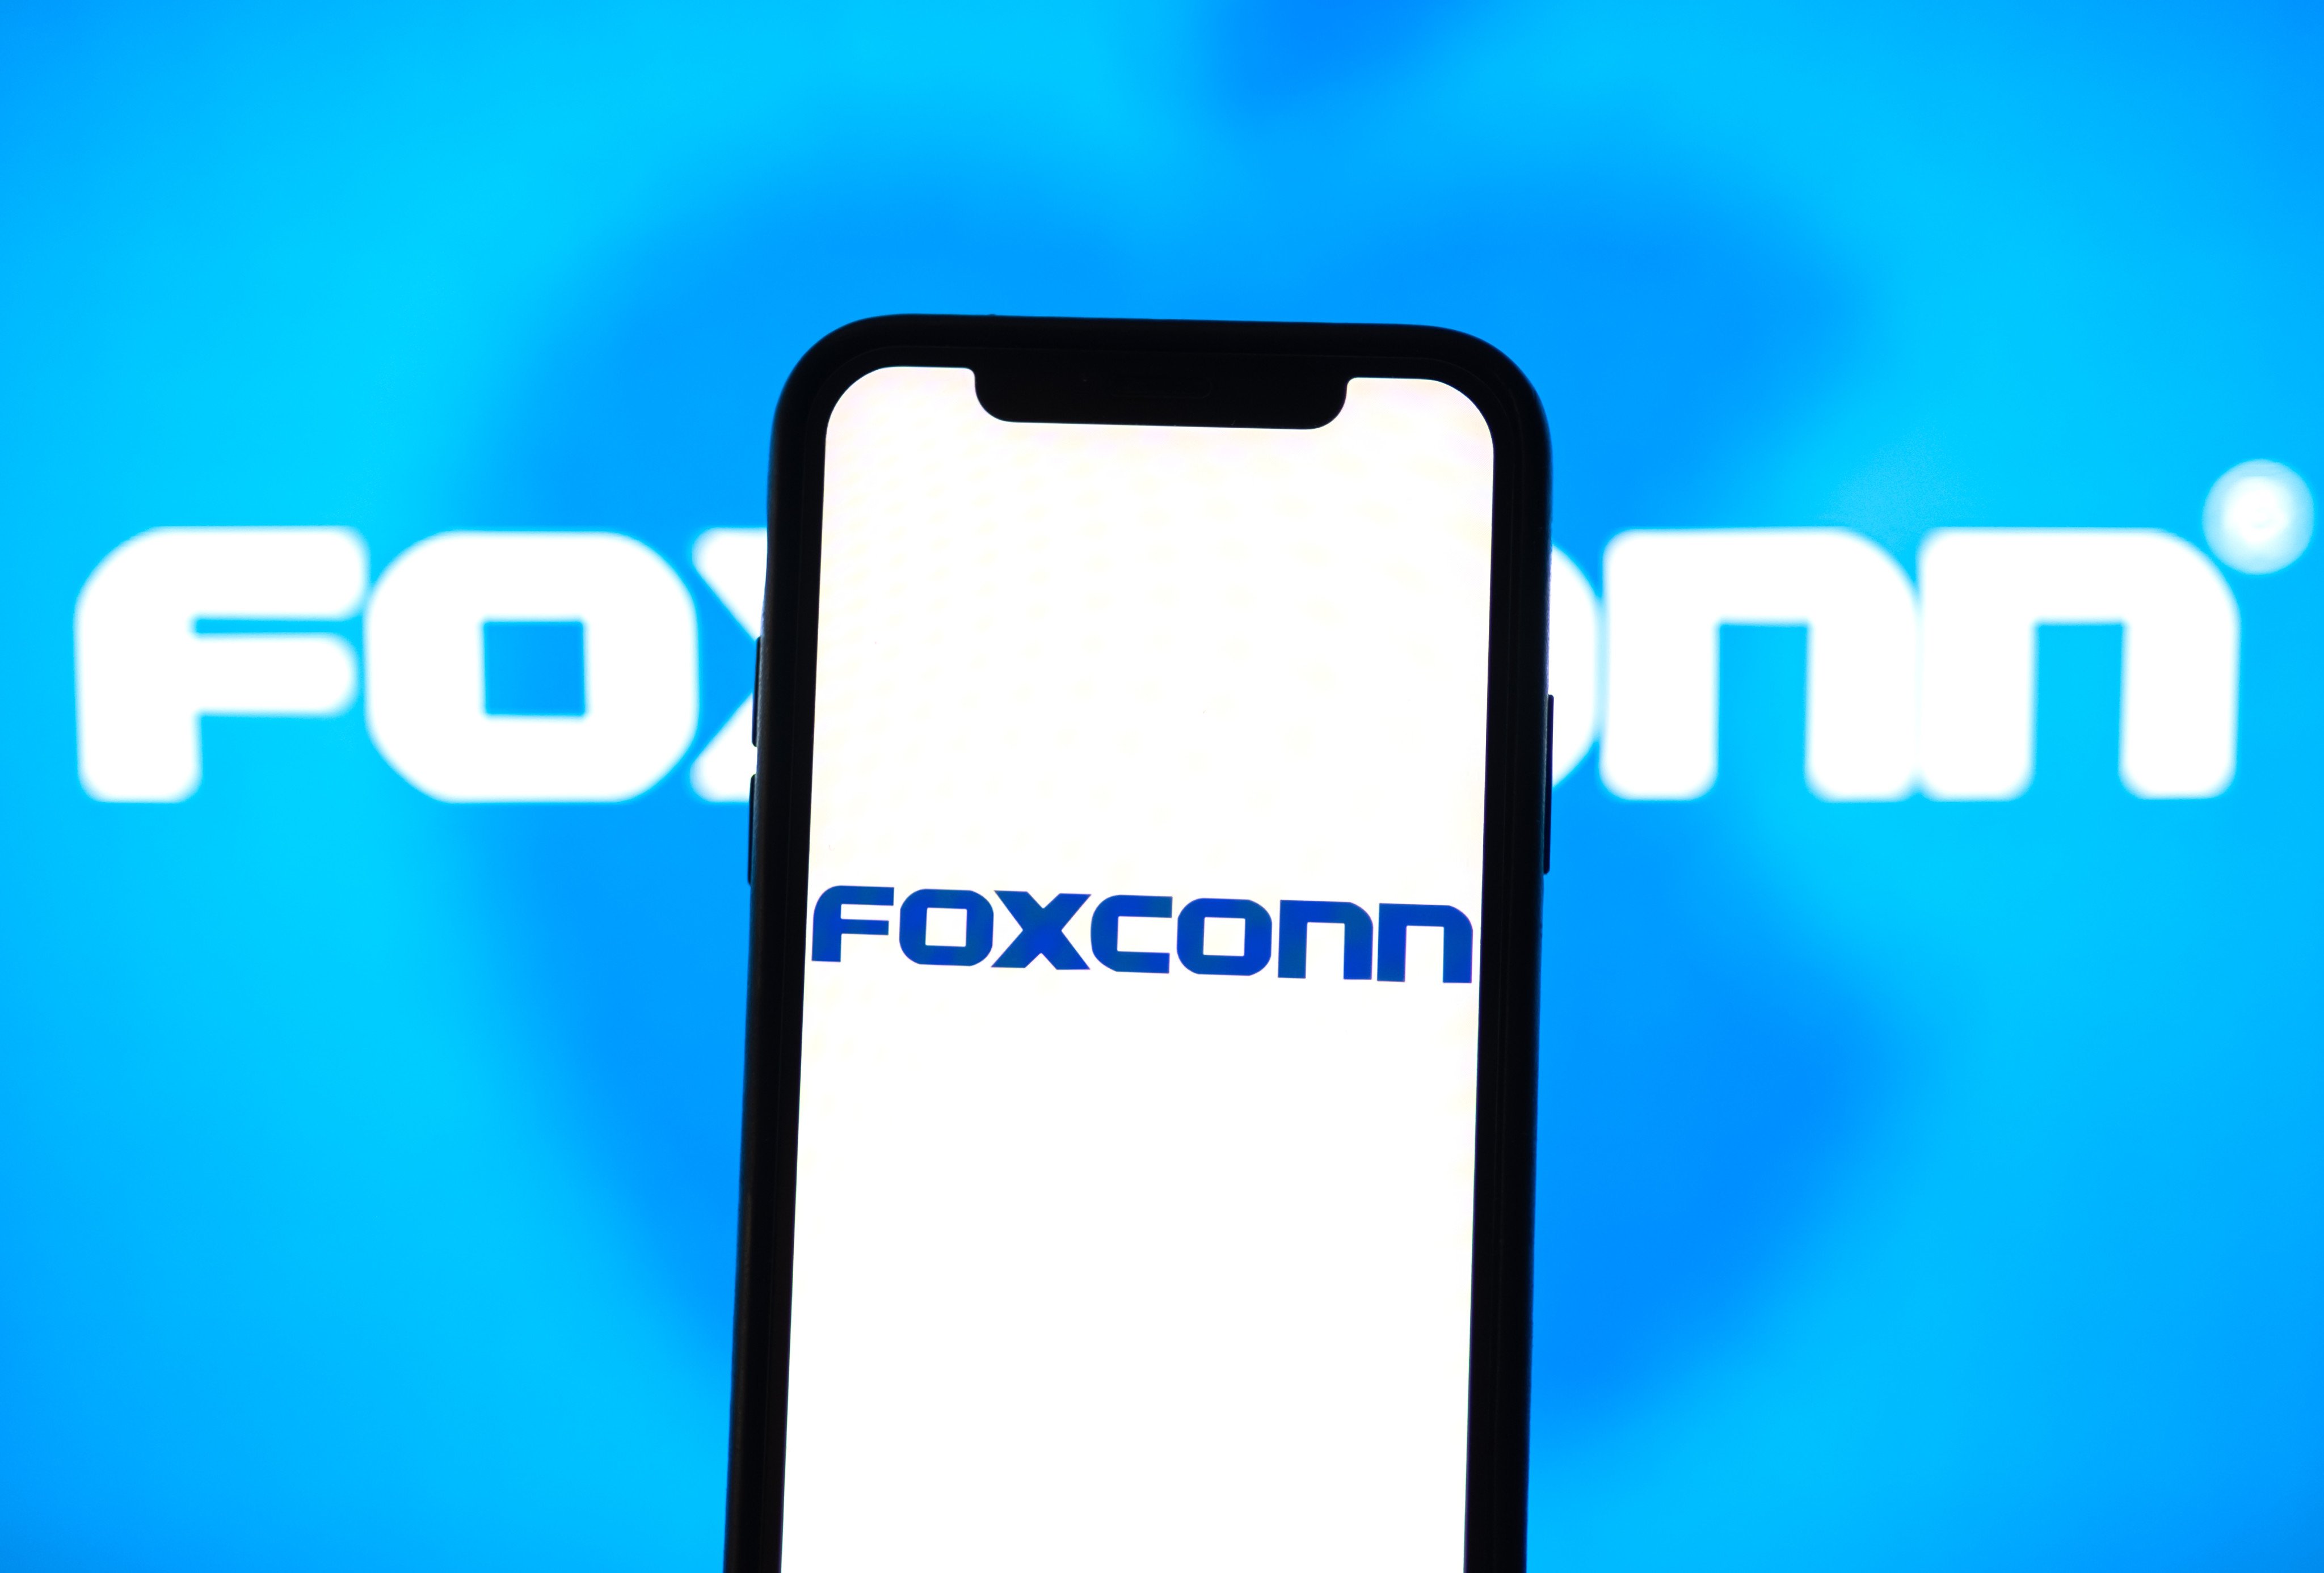 The Foxconn logo on a smartphone screen. Photo: Shutterstock